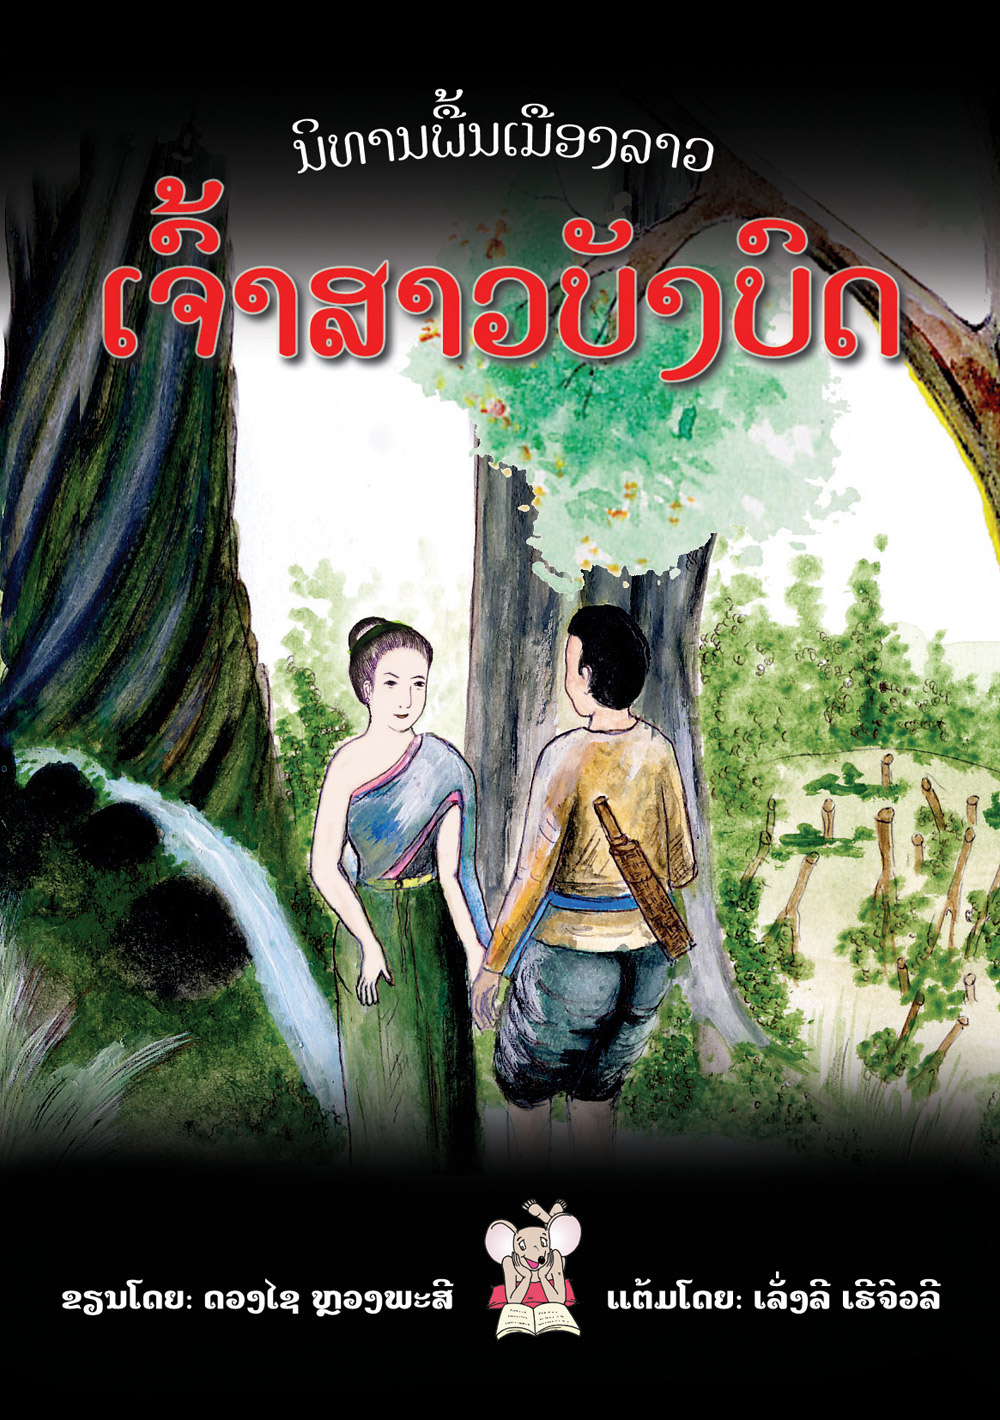 The Invisible Bride large book cover, published in Lao language